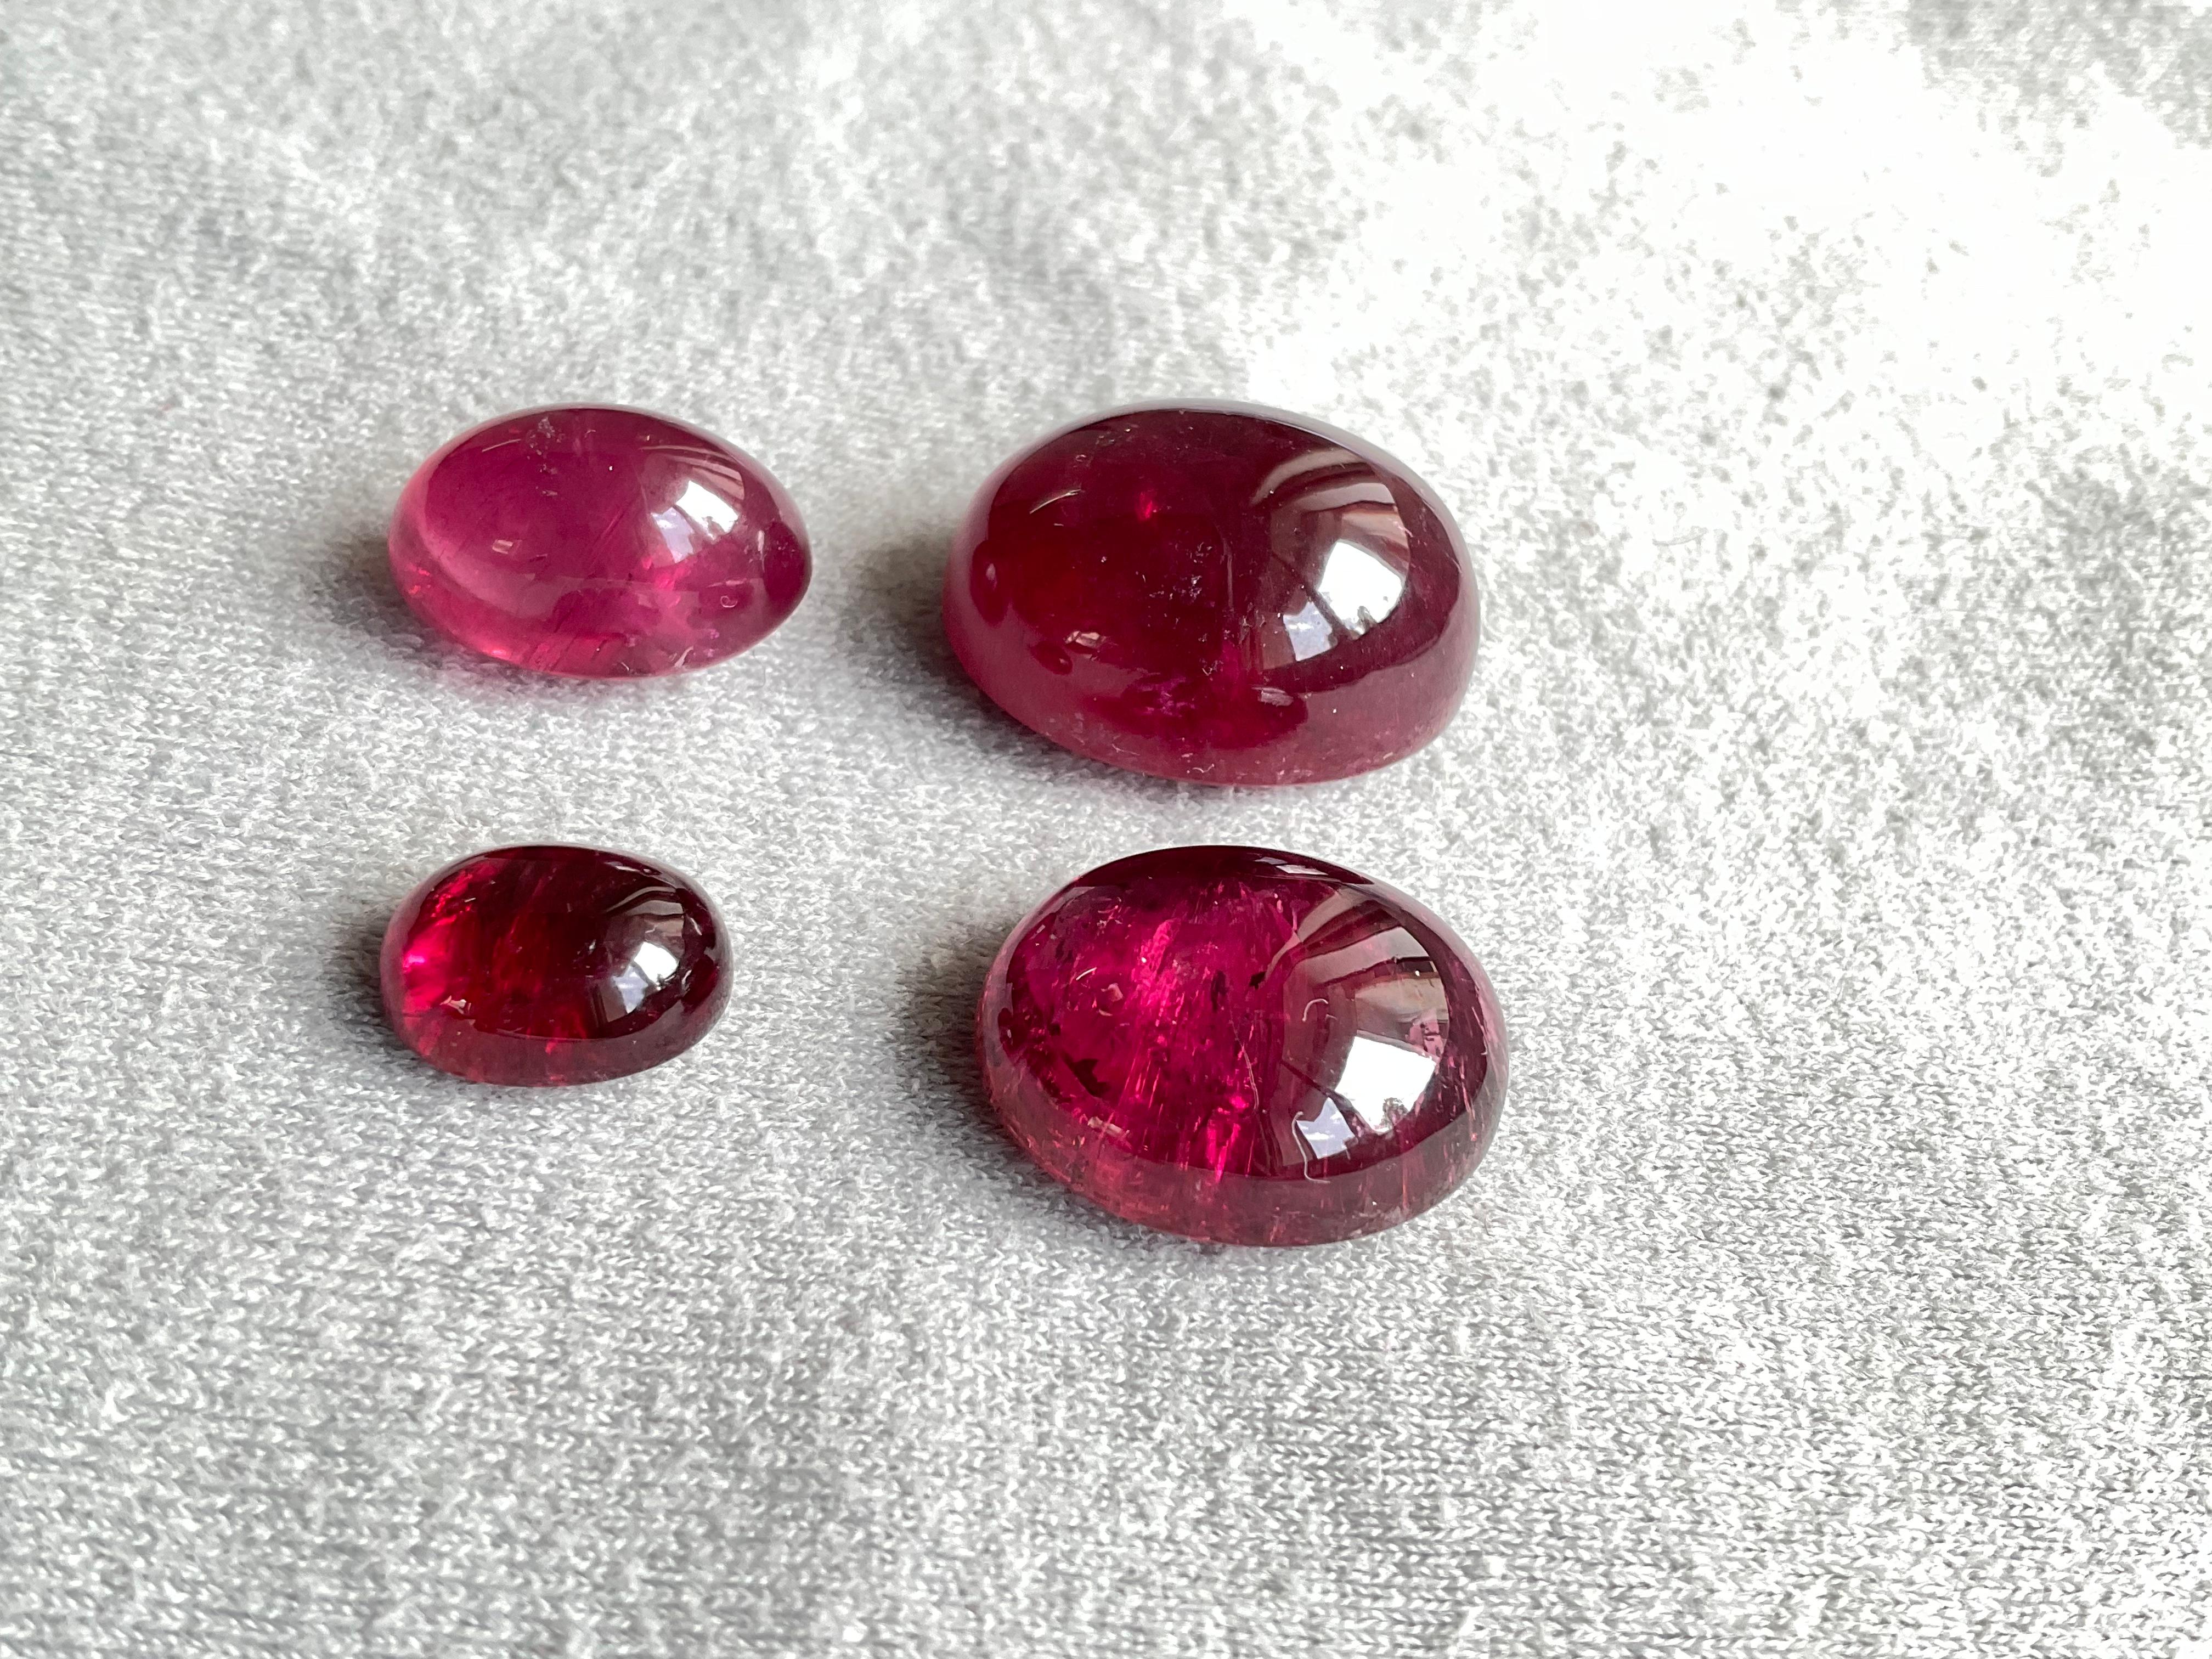 92.86 Carats Top Quality Rubellite Tourmaline Cabochon 4 Pieces Natural Gemstone For Sale 2